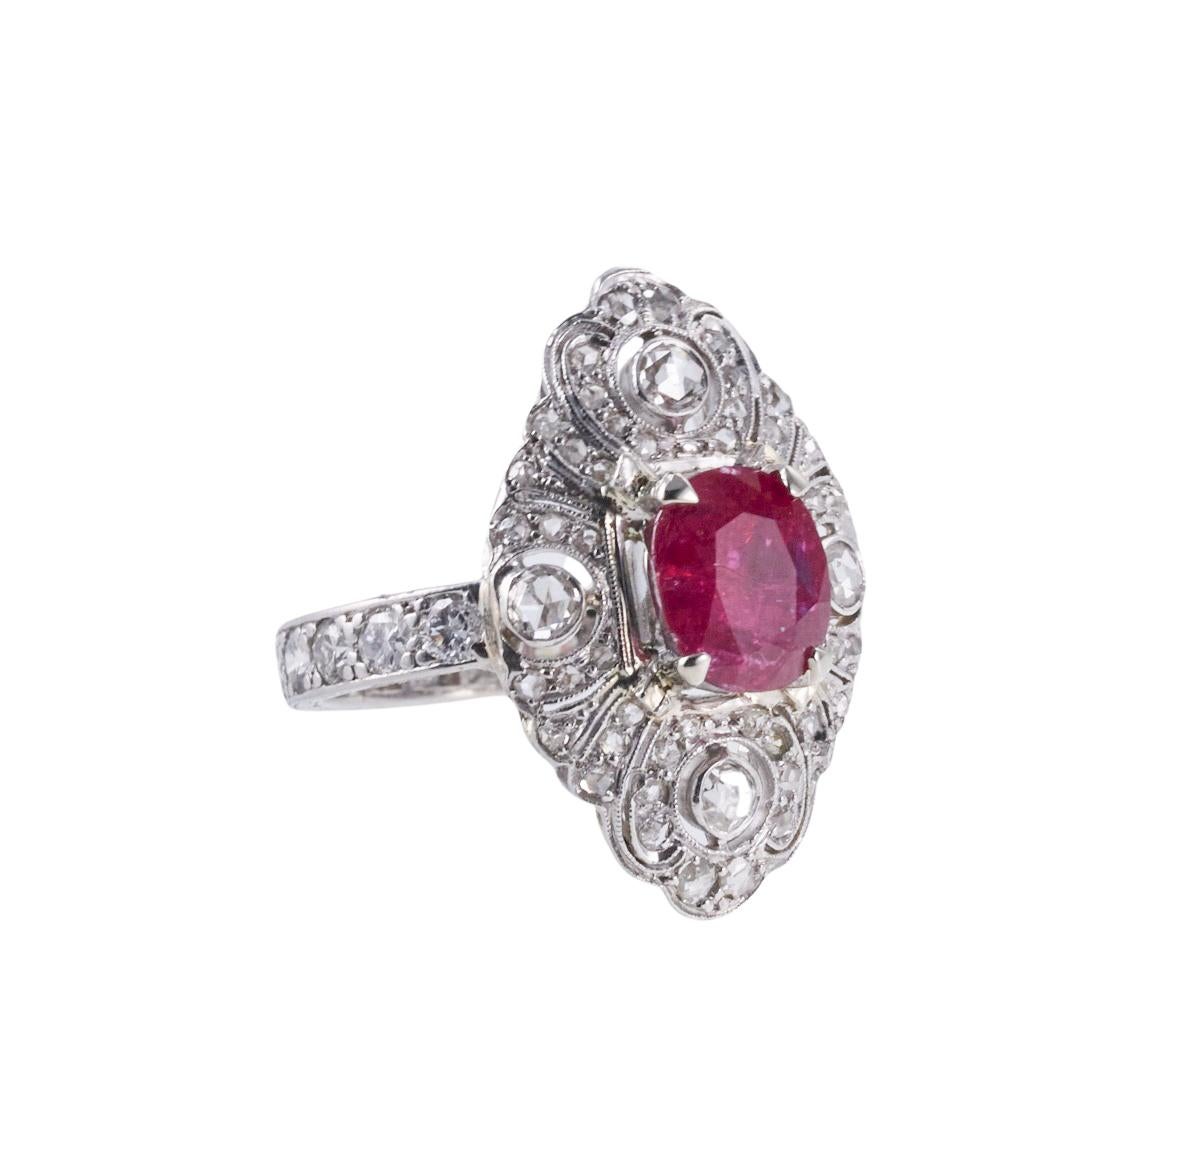 Platinum cocktail ring, set with center C. Dunaigre of Switzerland certified 1.50ct no heat Thailand ruby. Stone measures approx. 7.85 x 6.45 x 3.35mm. Surrounded with a total of approximately 1.40ctw in H-I/SI diamonds. Ring size 6.5, top is 22mm x